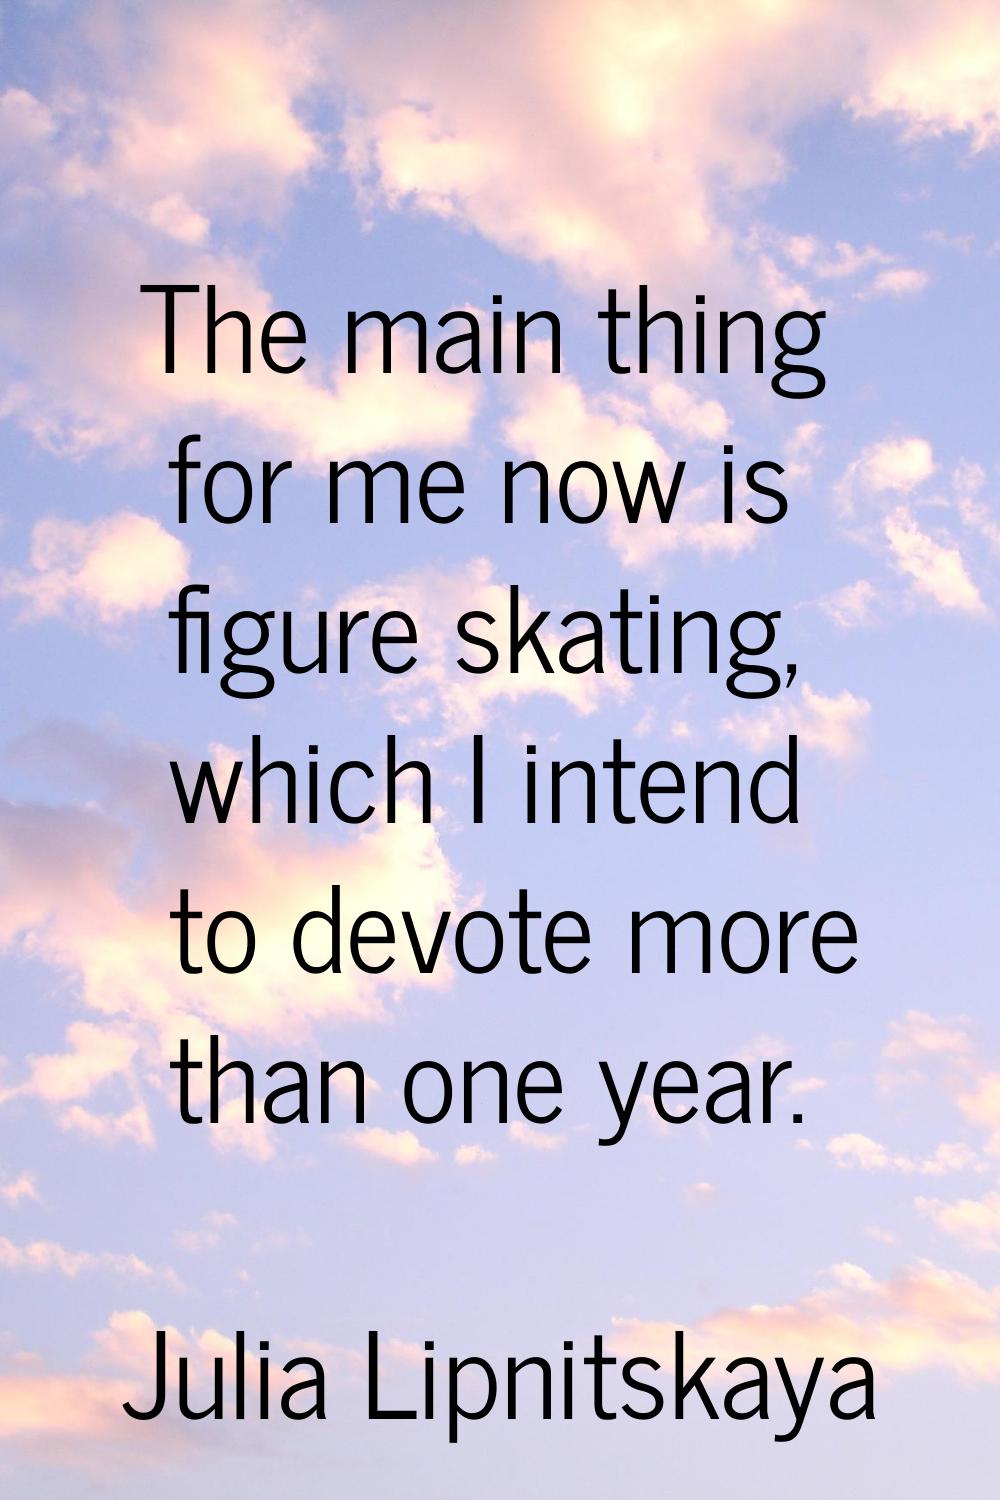 The main thing for me now is figure skating, which I intend to devote more than one year.